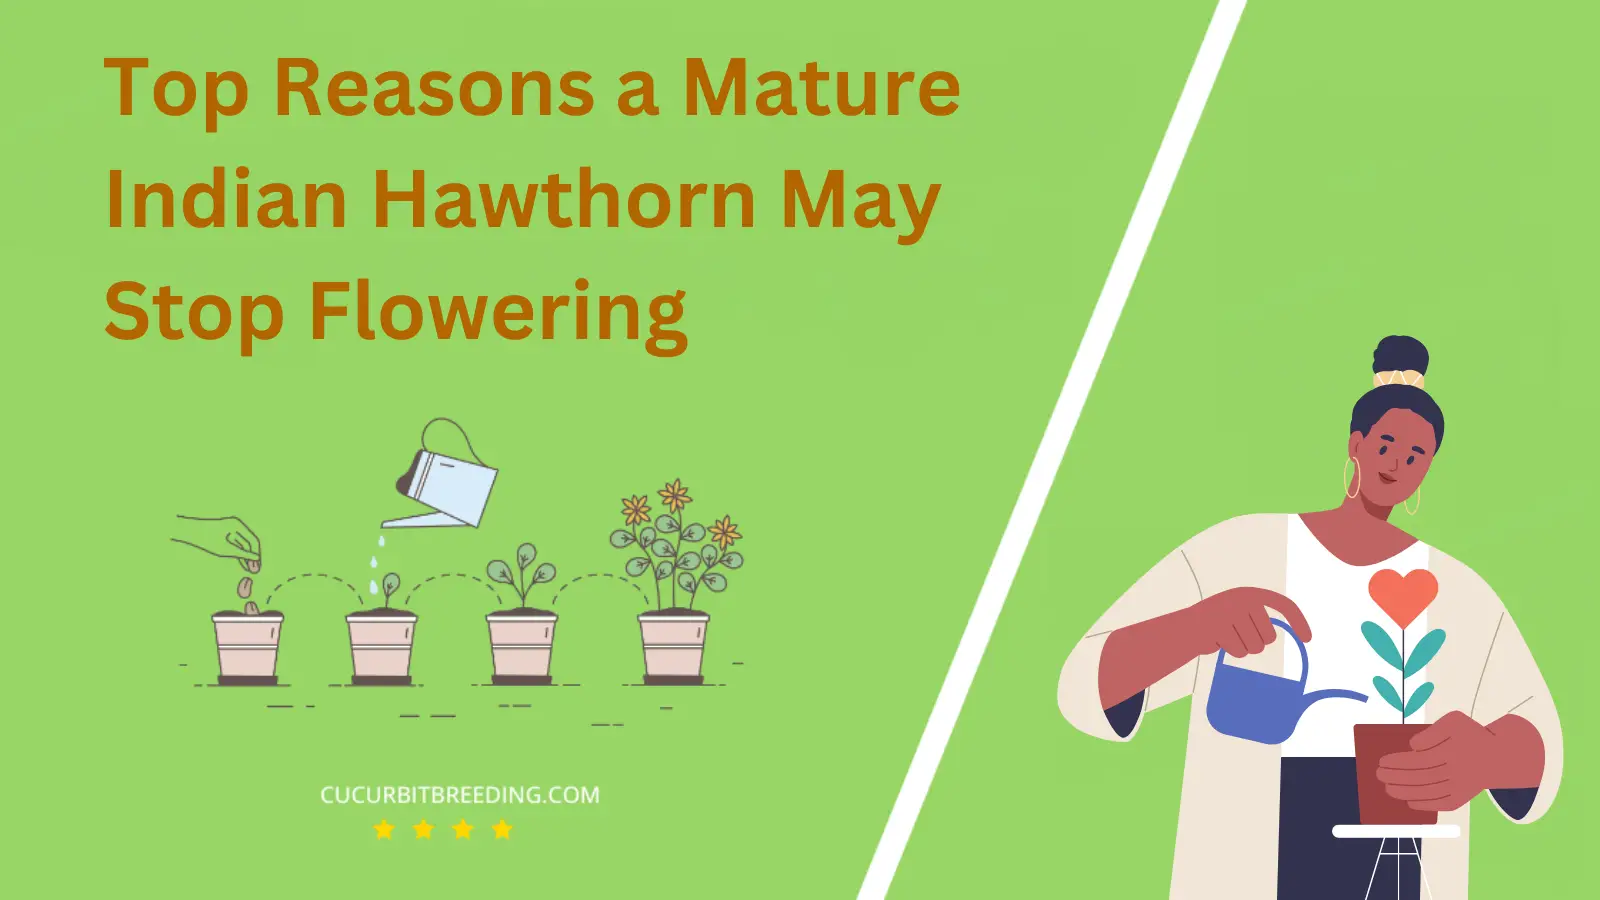 Top Reasons a Mature Indian Hawthorn May Stop Flowering